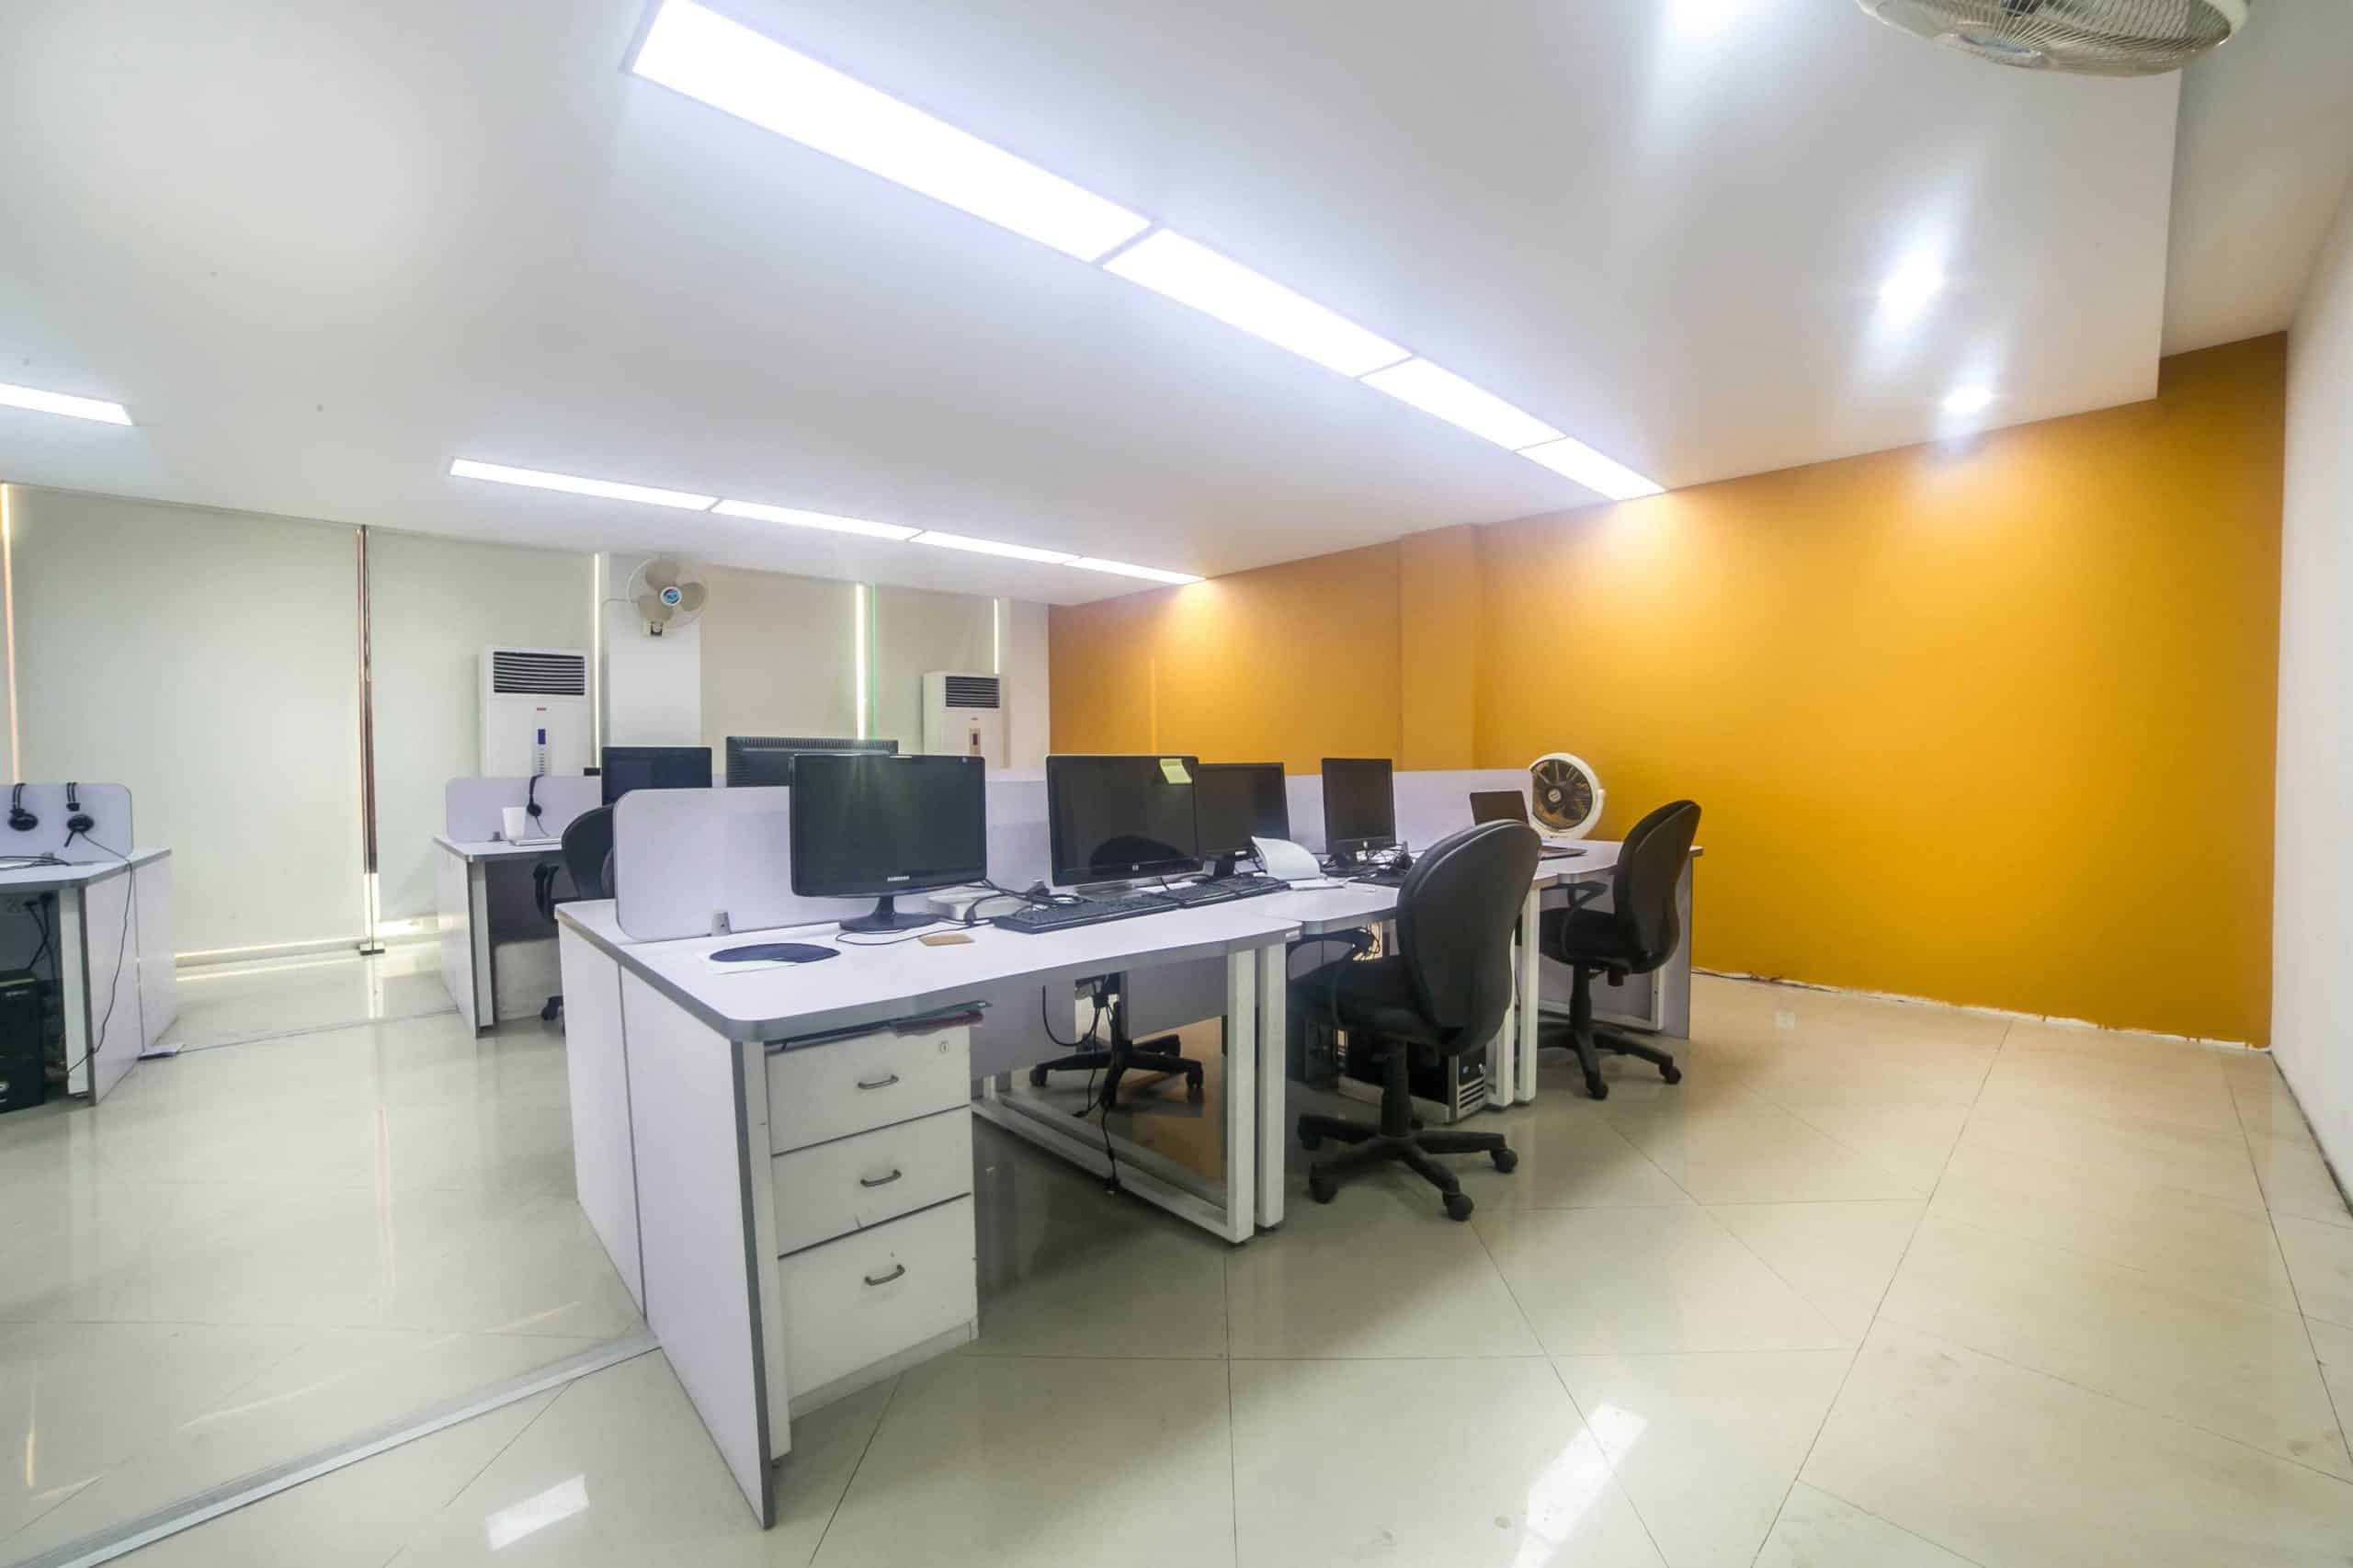 working spaces in Lahore